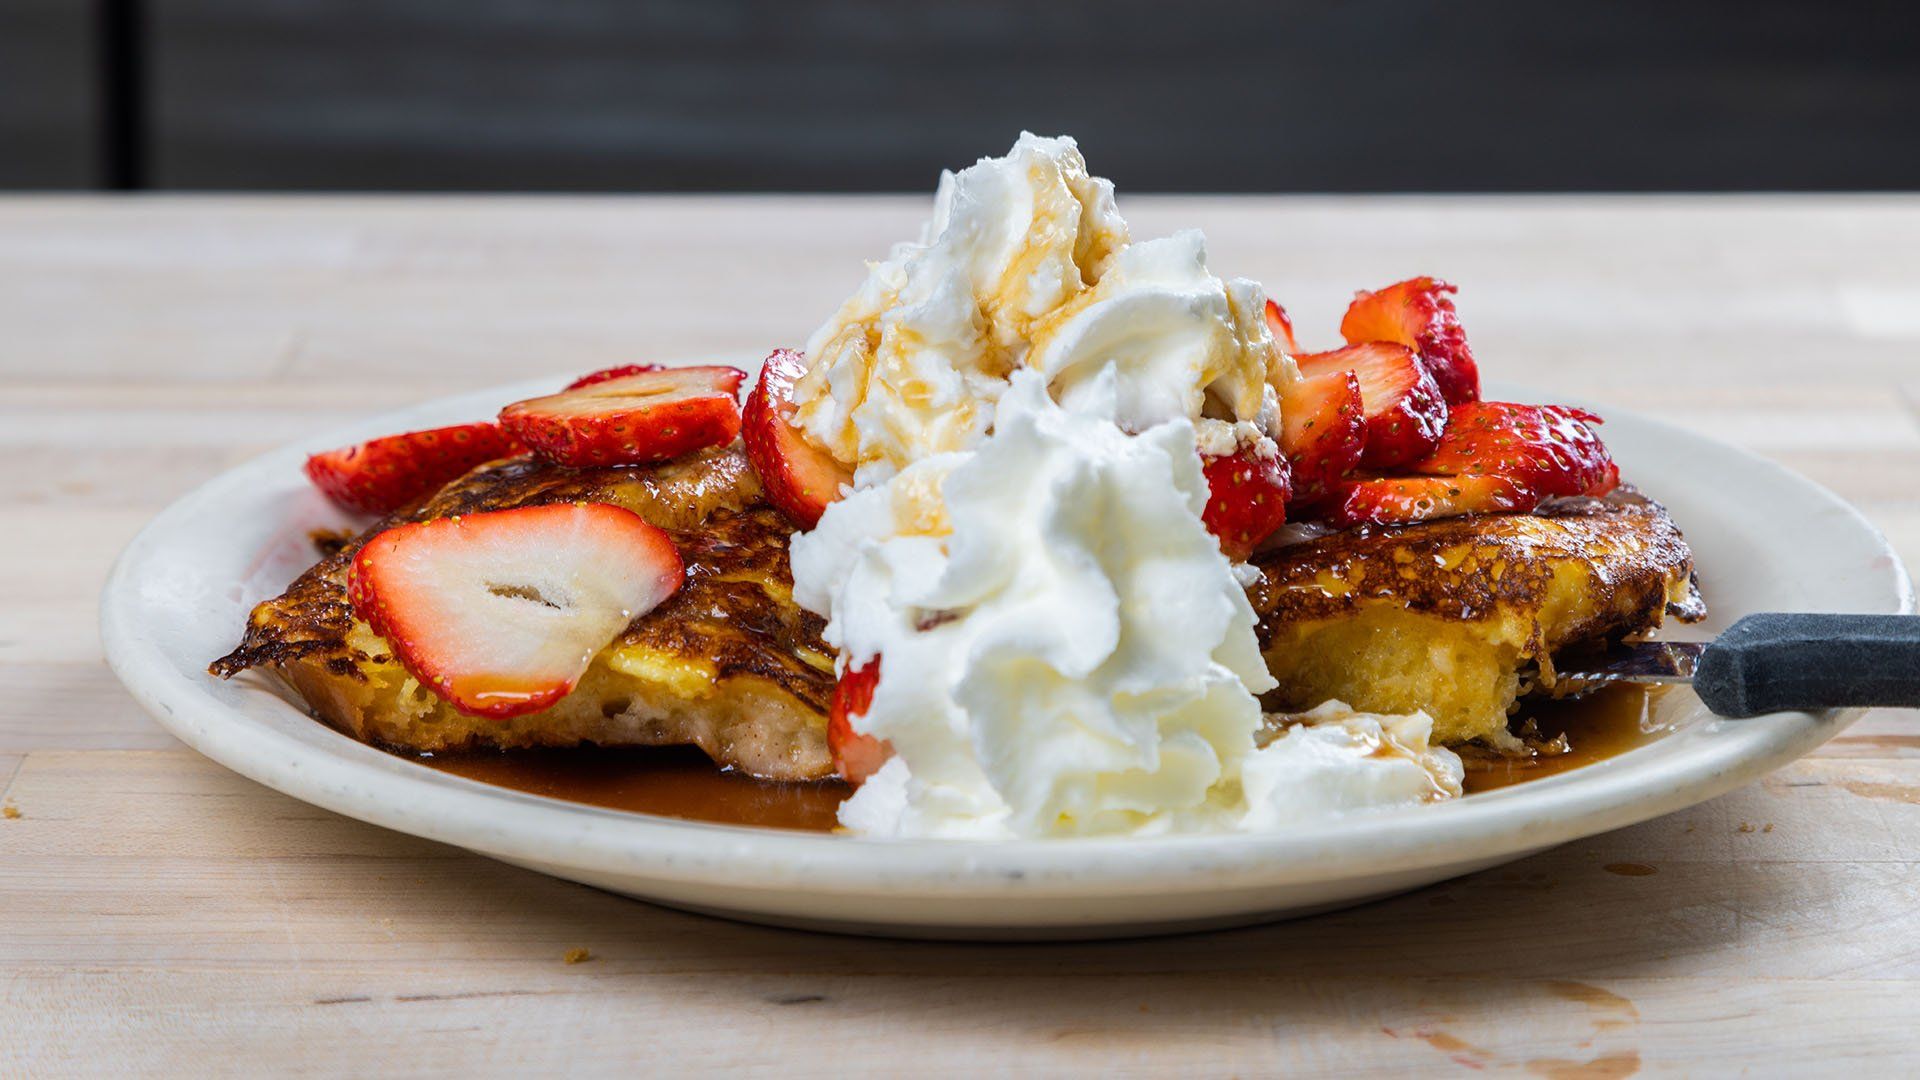 Cinnamon roll French toast with strawberries and scratch made whipped cream